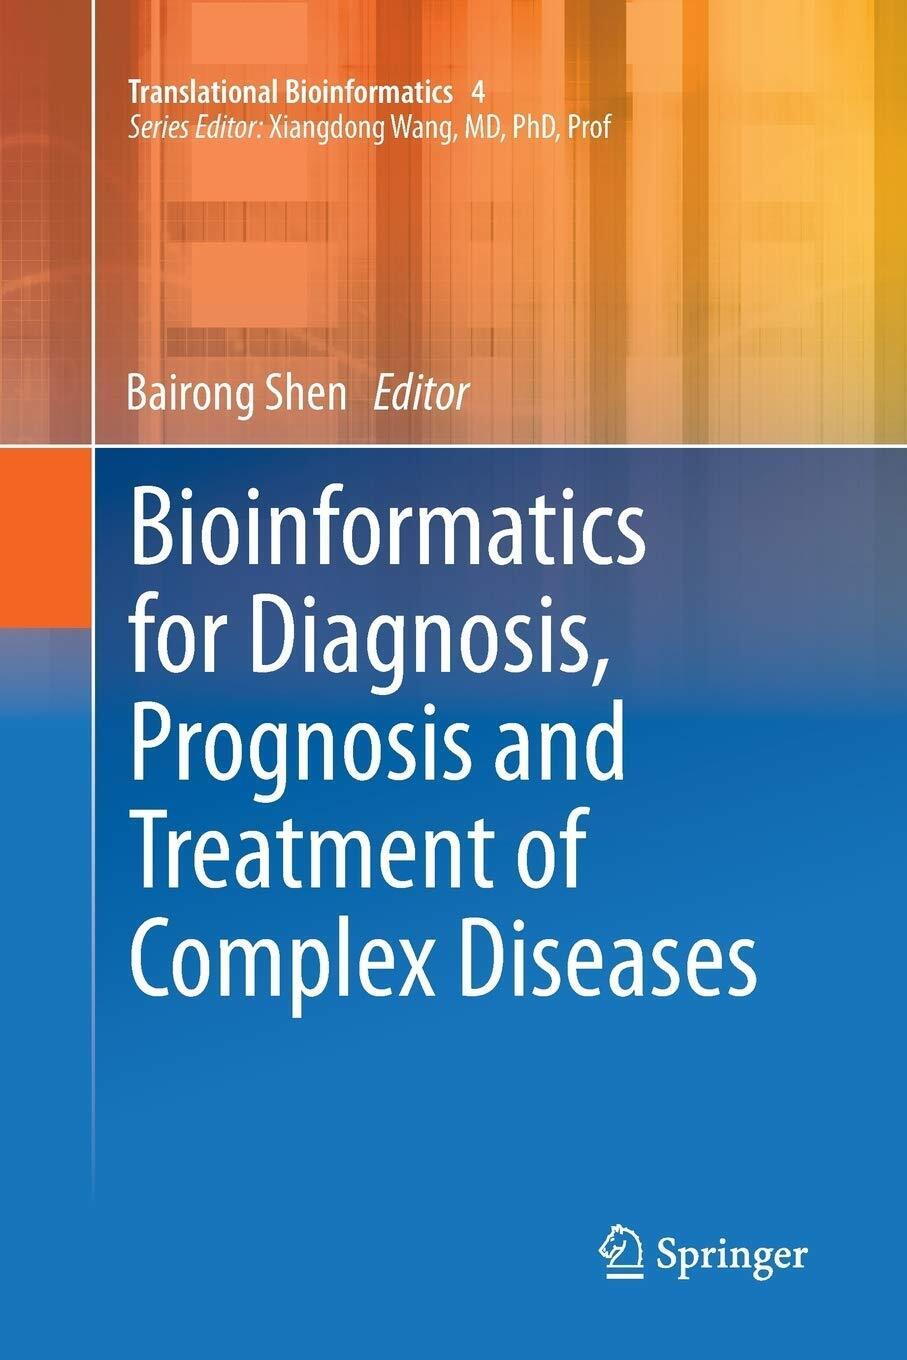 Bioinformatics for Diagnosis, Prognosis and Treatment of Complex Diseases - 2016